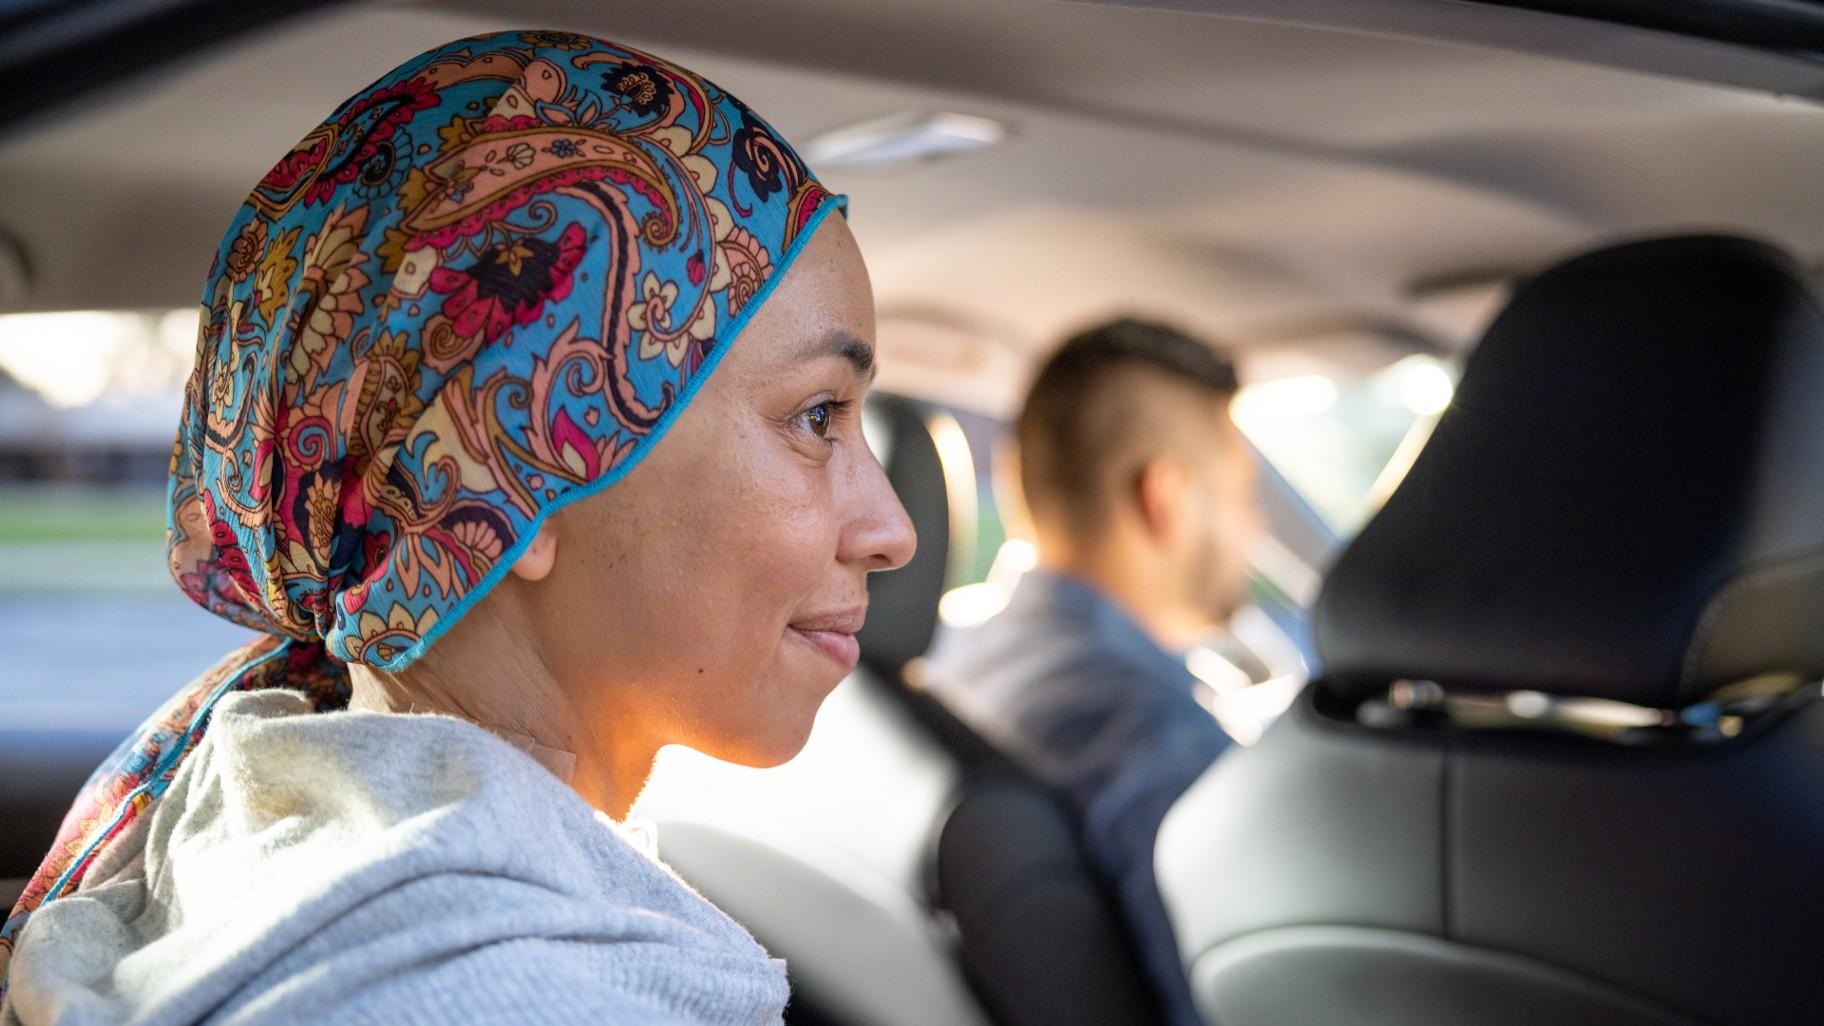 The American Cancer Society’s Road To Recovery program has only been able to provide 25% of the rides requested by cancer patients in Cook County so far this year. (Courtesy of American Cancer Society)